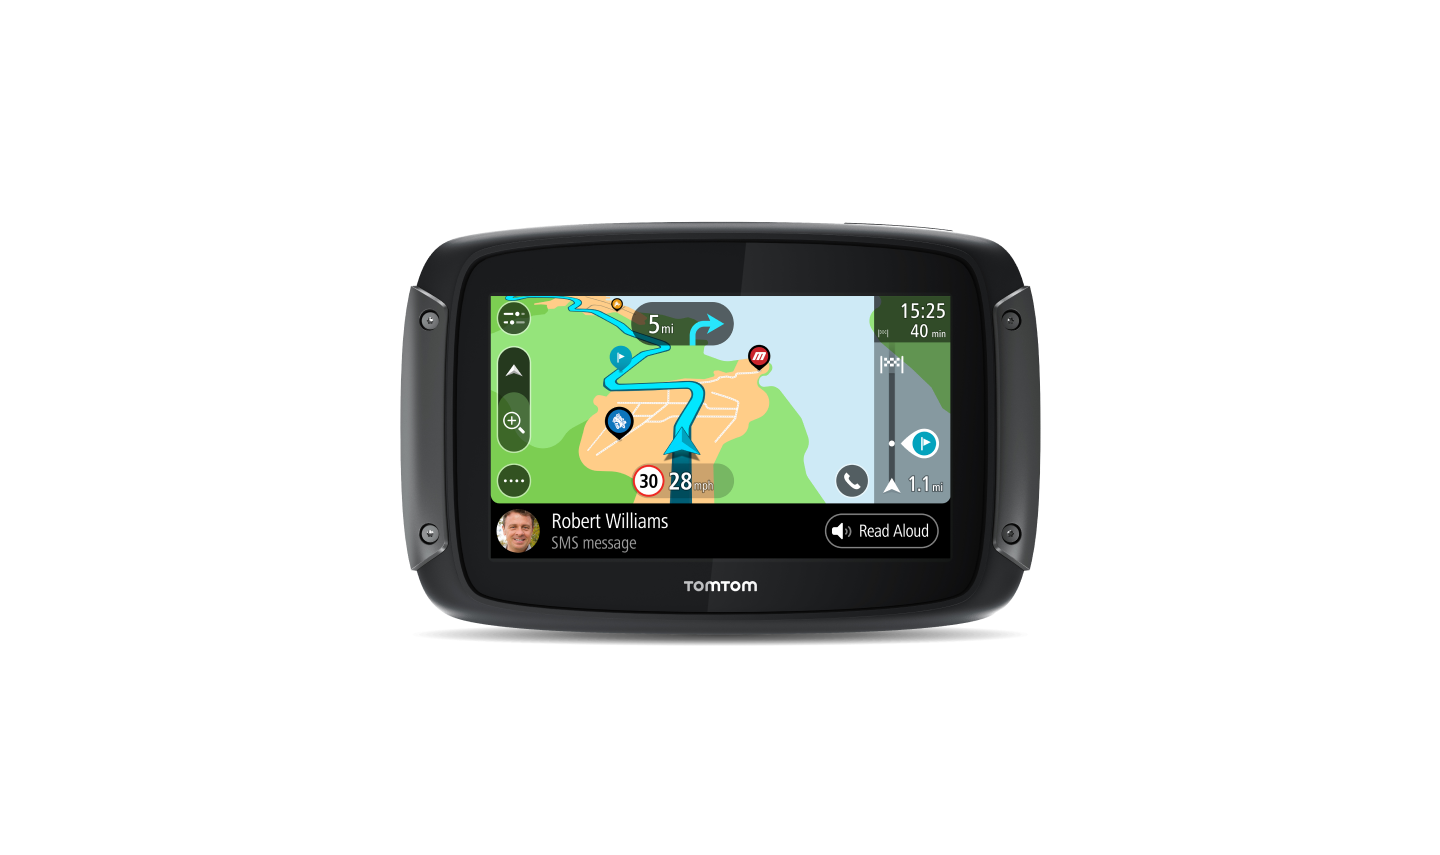 overhead Land magnetron TomTom Motorcycle GPS | Latest TomTom Rider Series for drivers